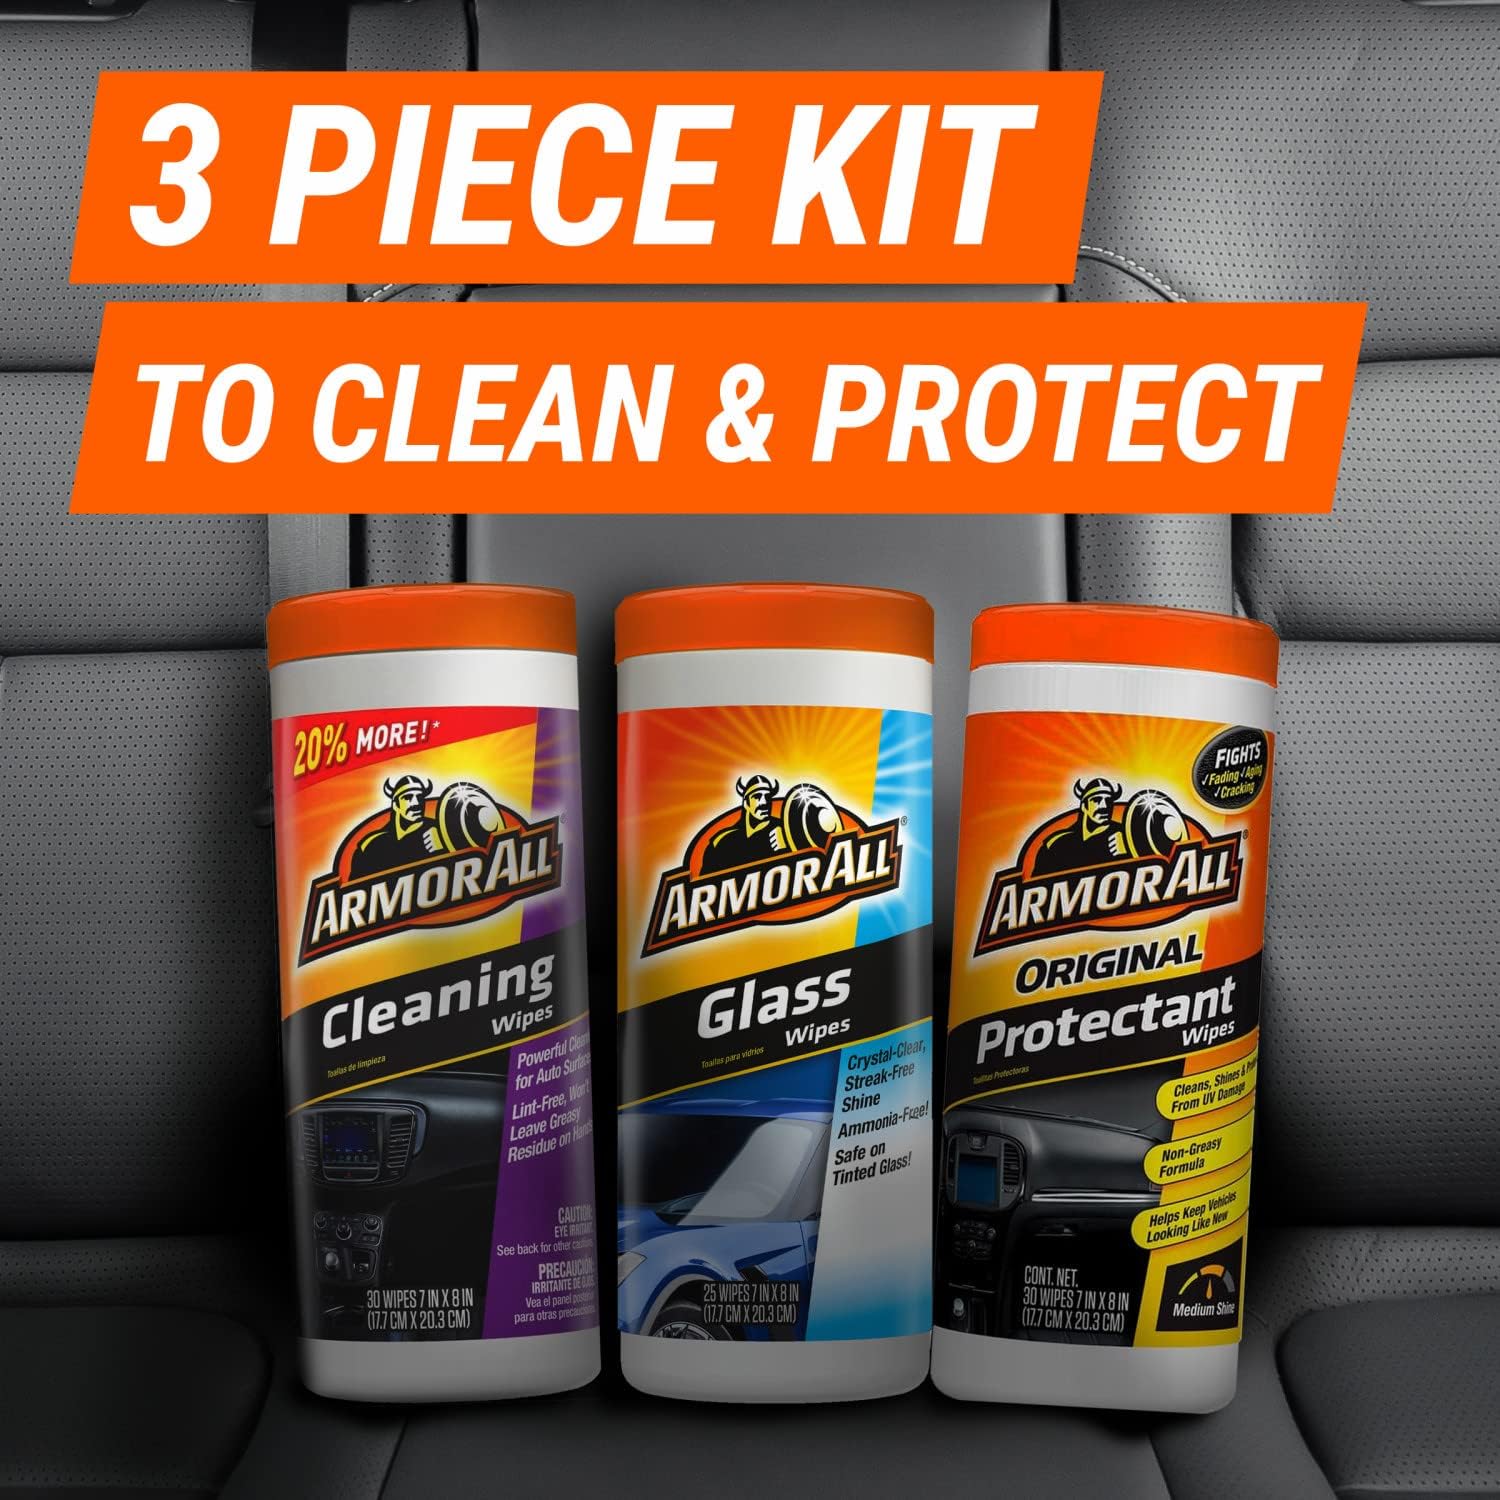 Armor All Car Wipes Multi-Pack by Armor All, Cleans Vehicle Interior and Exterior, Includes All Protectant Wipes, Armor All Glass and Armor All Cleaning Wipes, 3-Pack, 30 Wipes Each